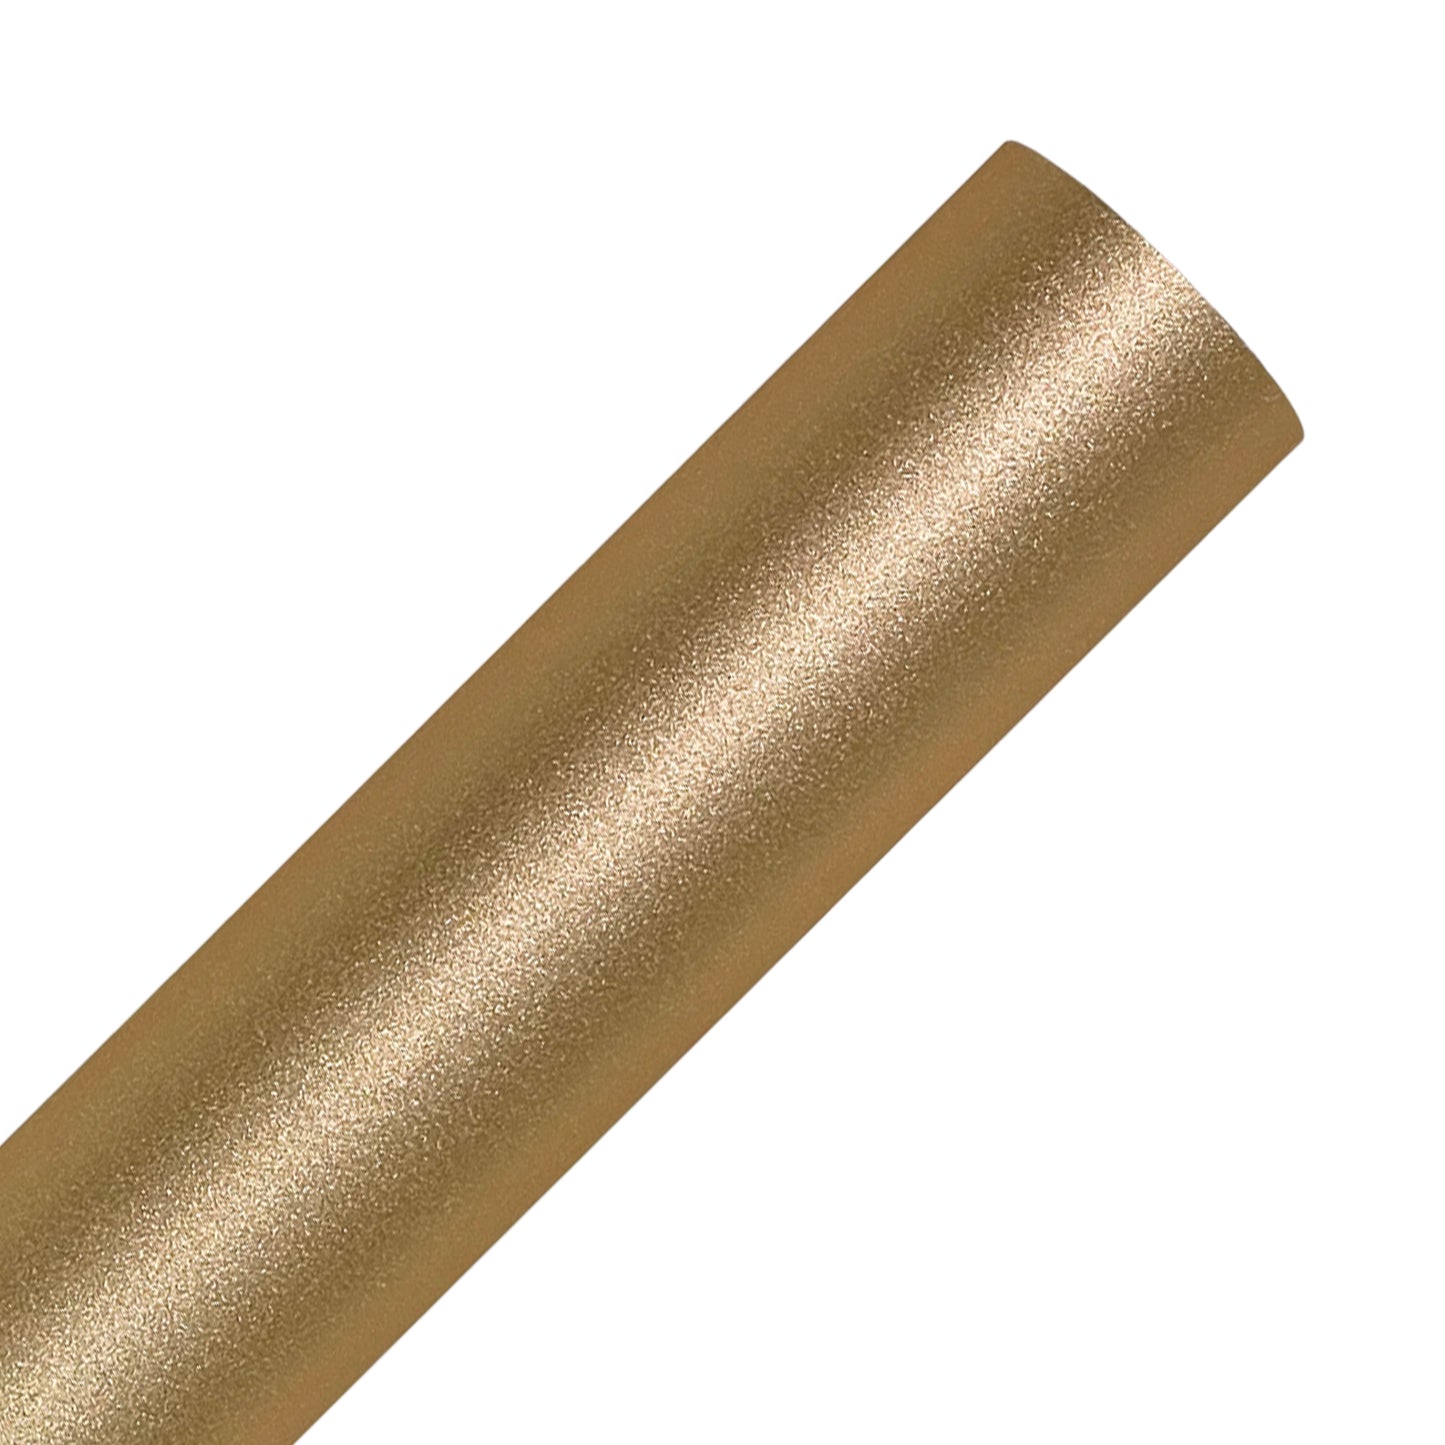 Gold Glitter Adhesive Vinyl Sheets By Craftables